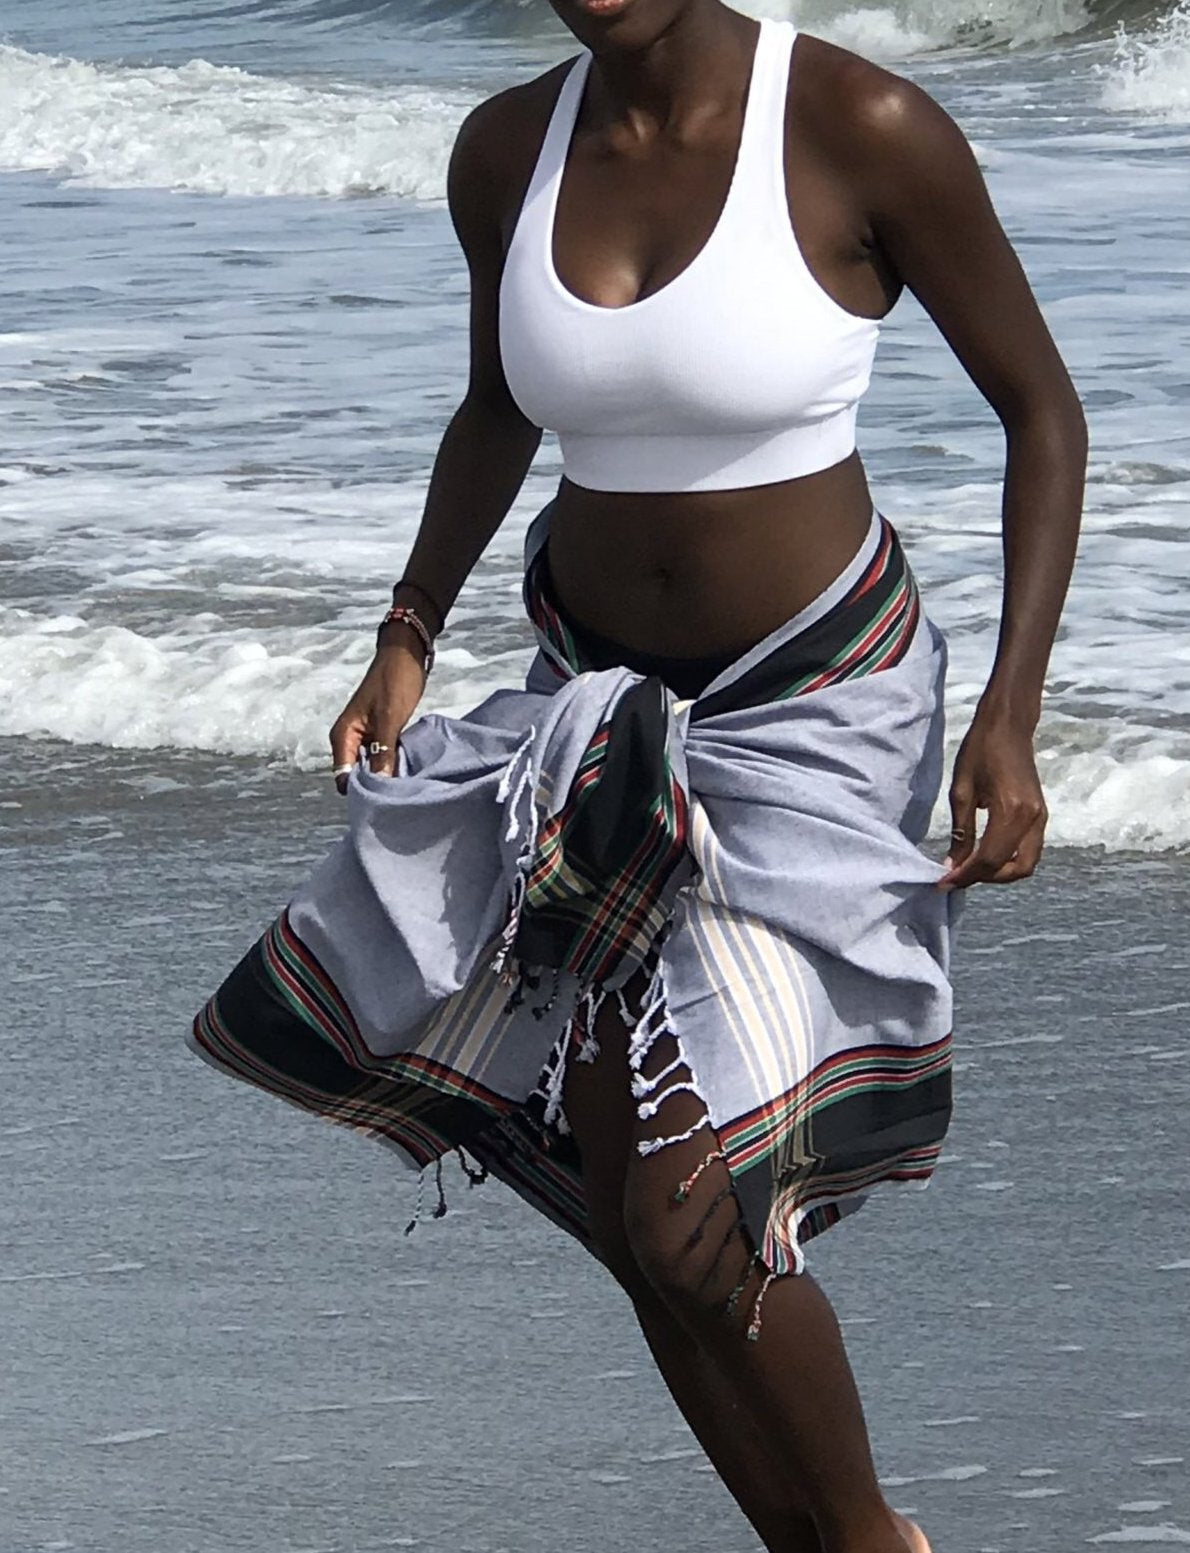 Black white Sarong Beach Wrap cotton African kikoy/ beach cover up / swimssuit coverup - The Lotus Wave 